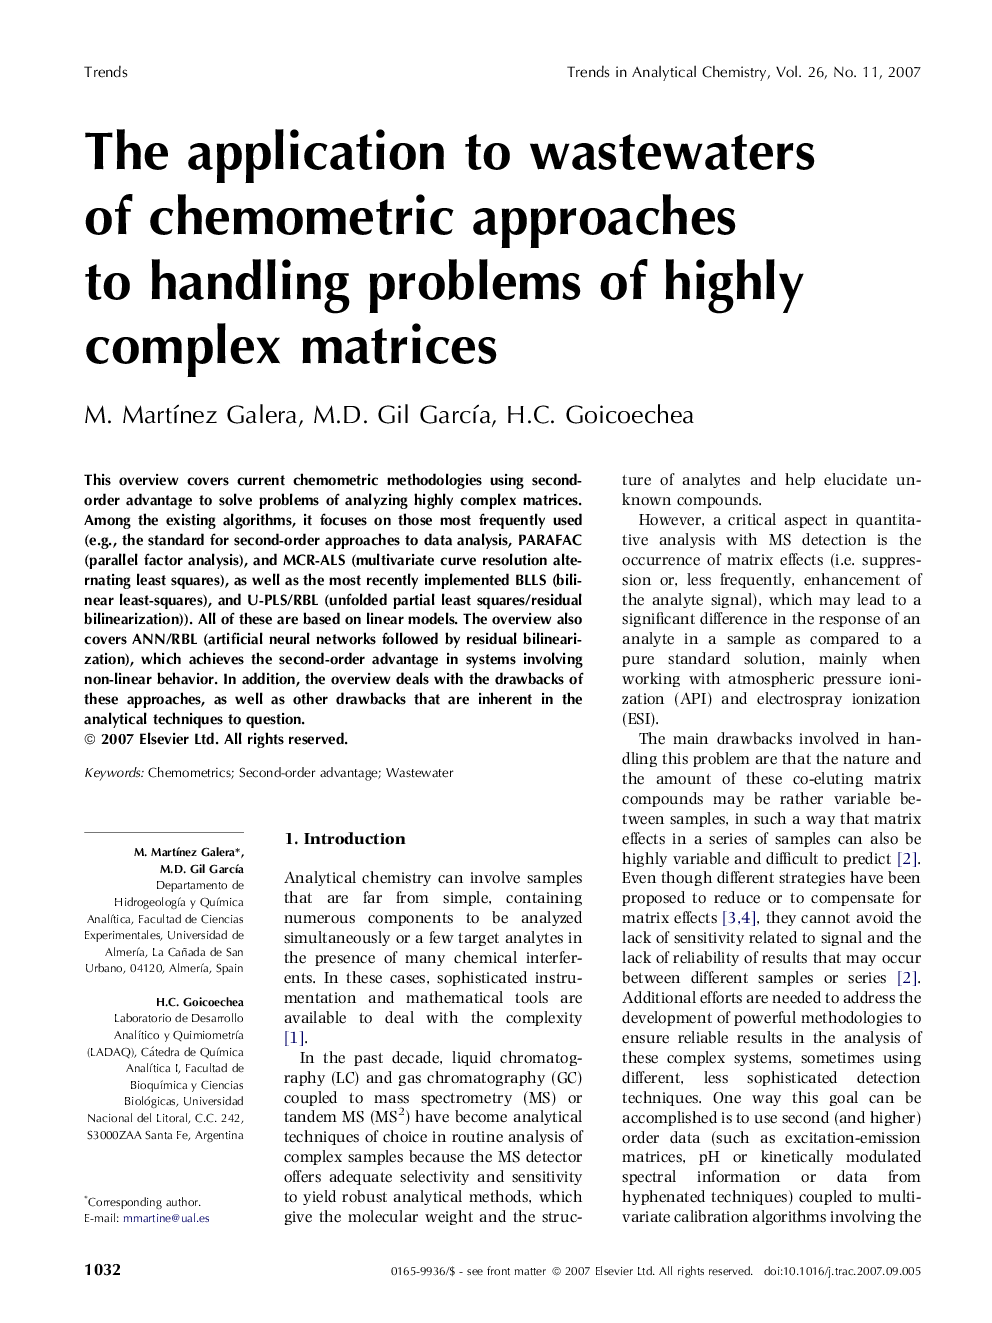 The application to wastewaters of chemometric approaches to handling problems of highly complex matrices